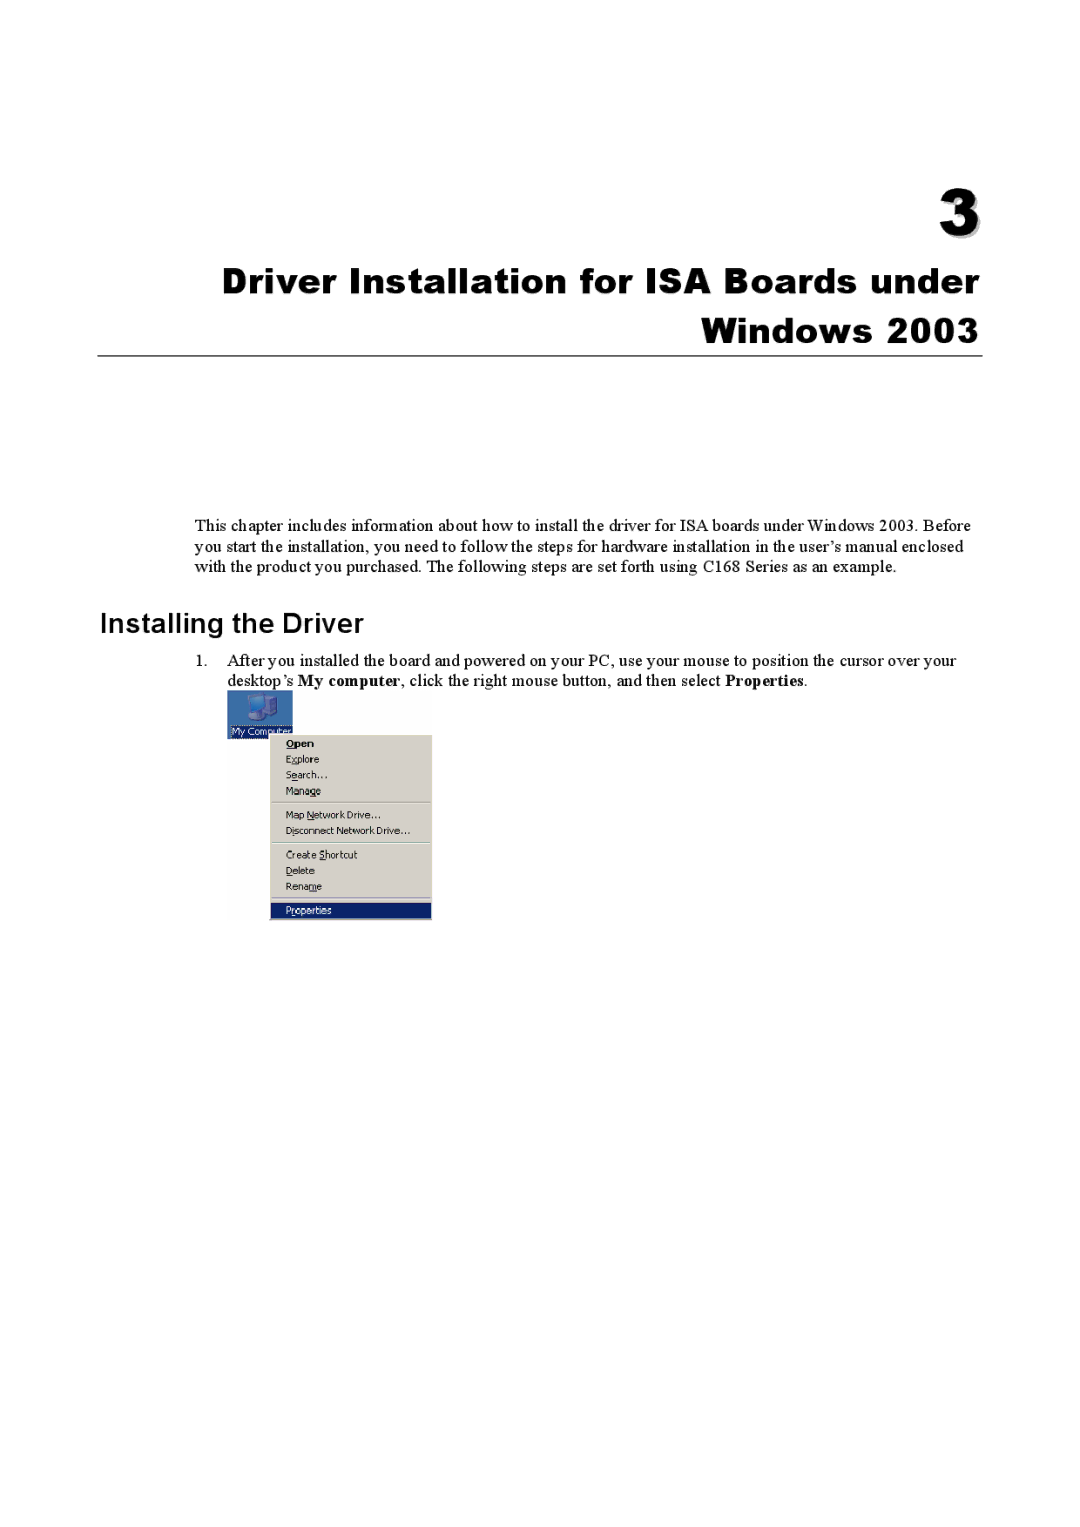 Moxa Technologies Windows 2003 Driver manual Driver Installation for ISA Boards under Windows 